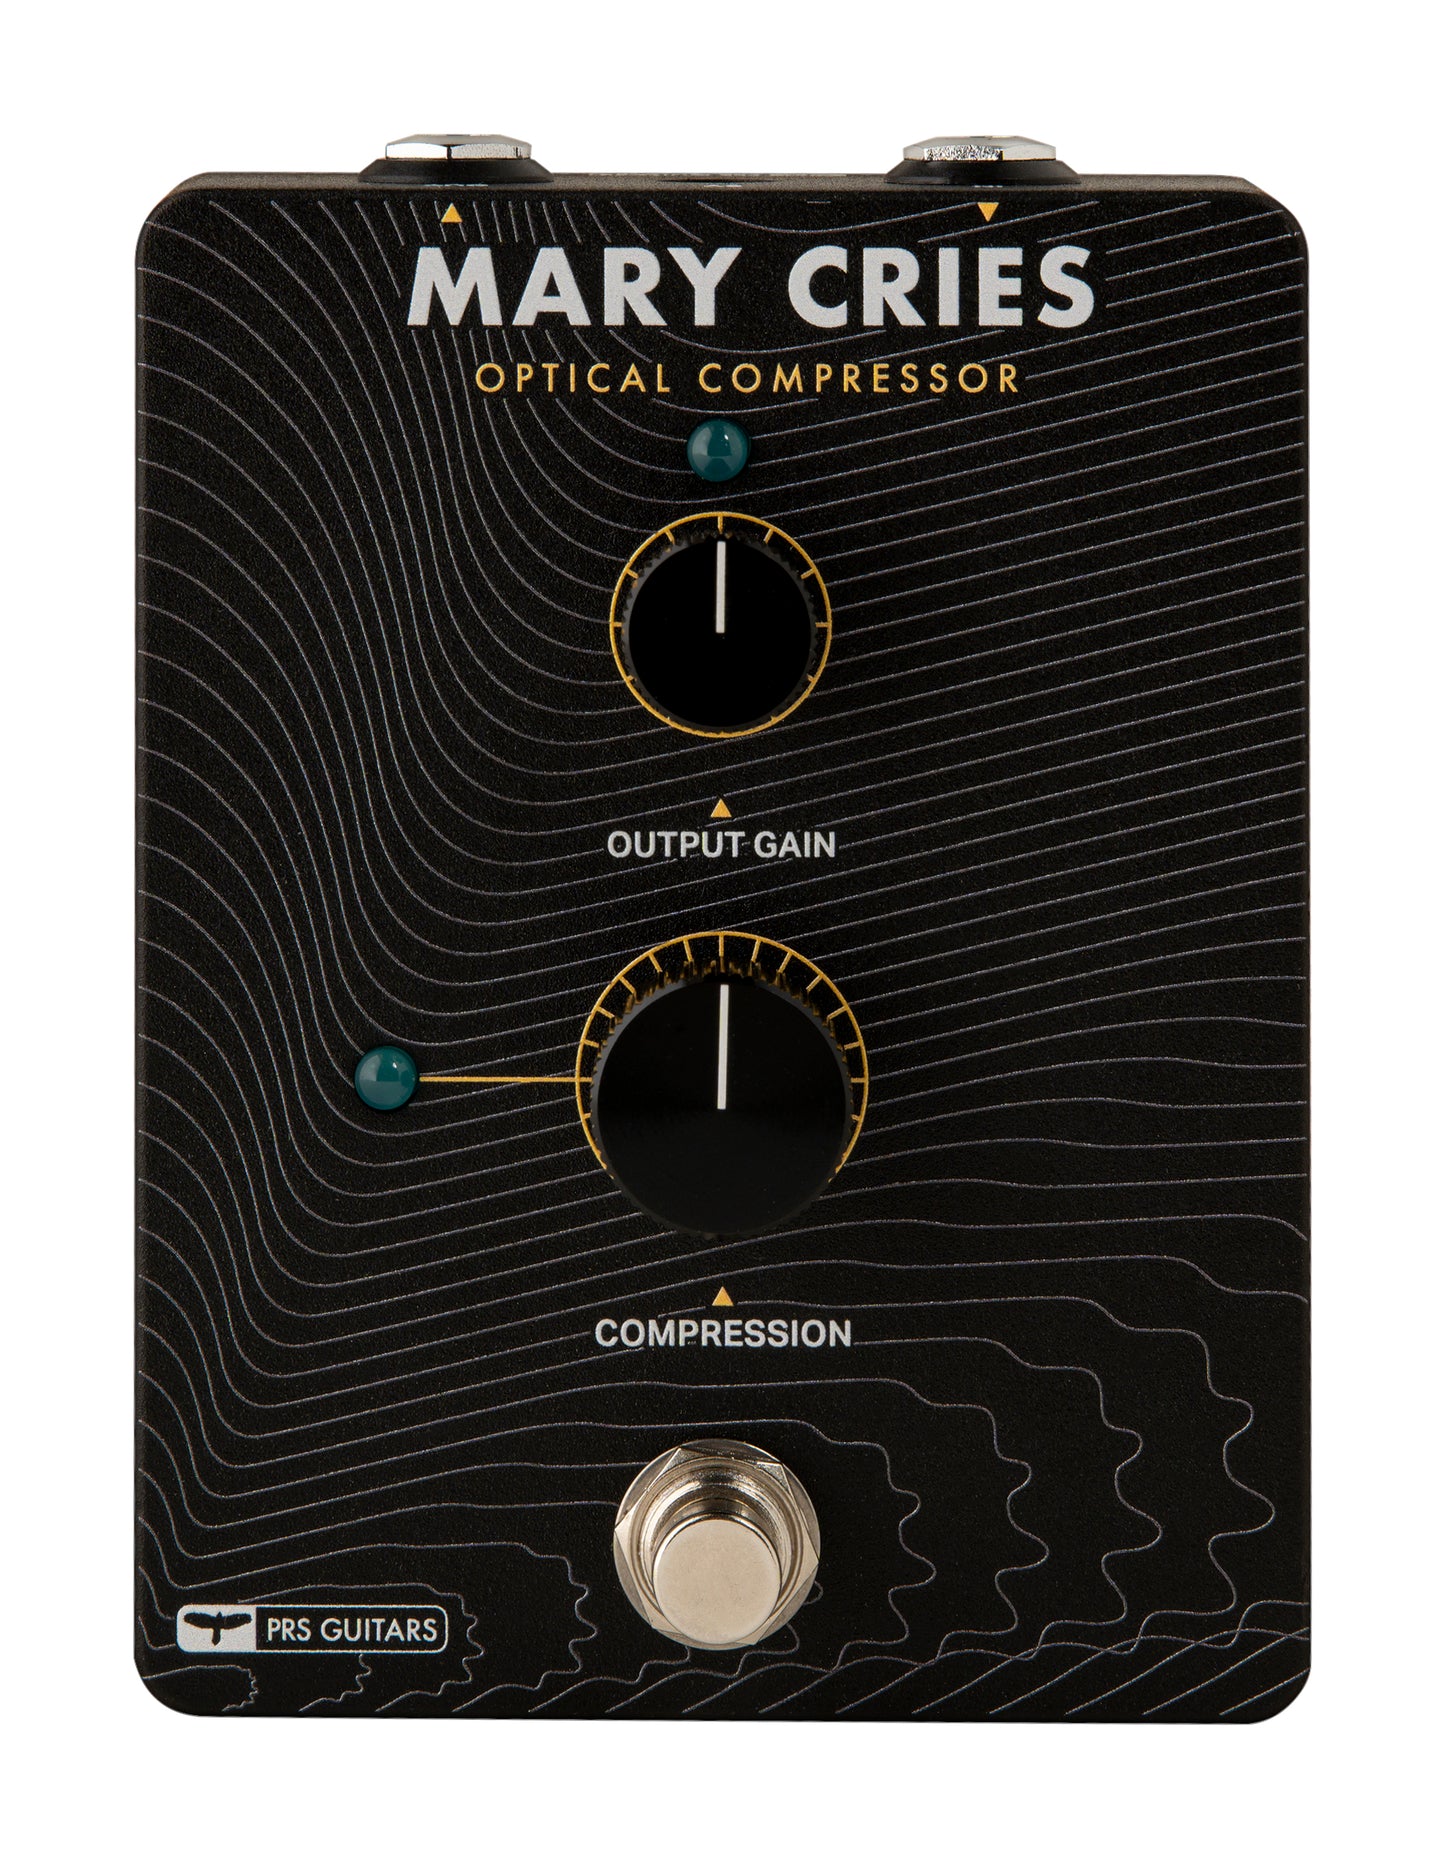 Paul Reed Smith PRS Mary Cries Optical Compressor Pedal Made in USA